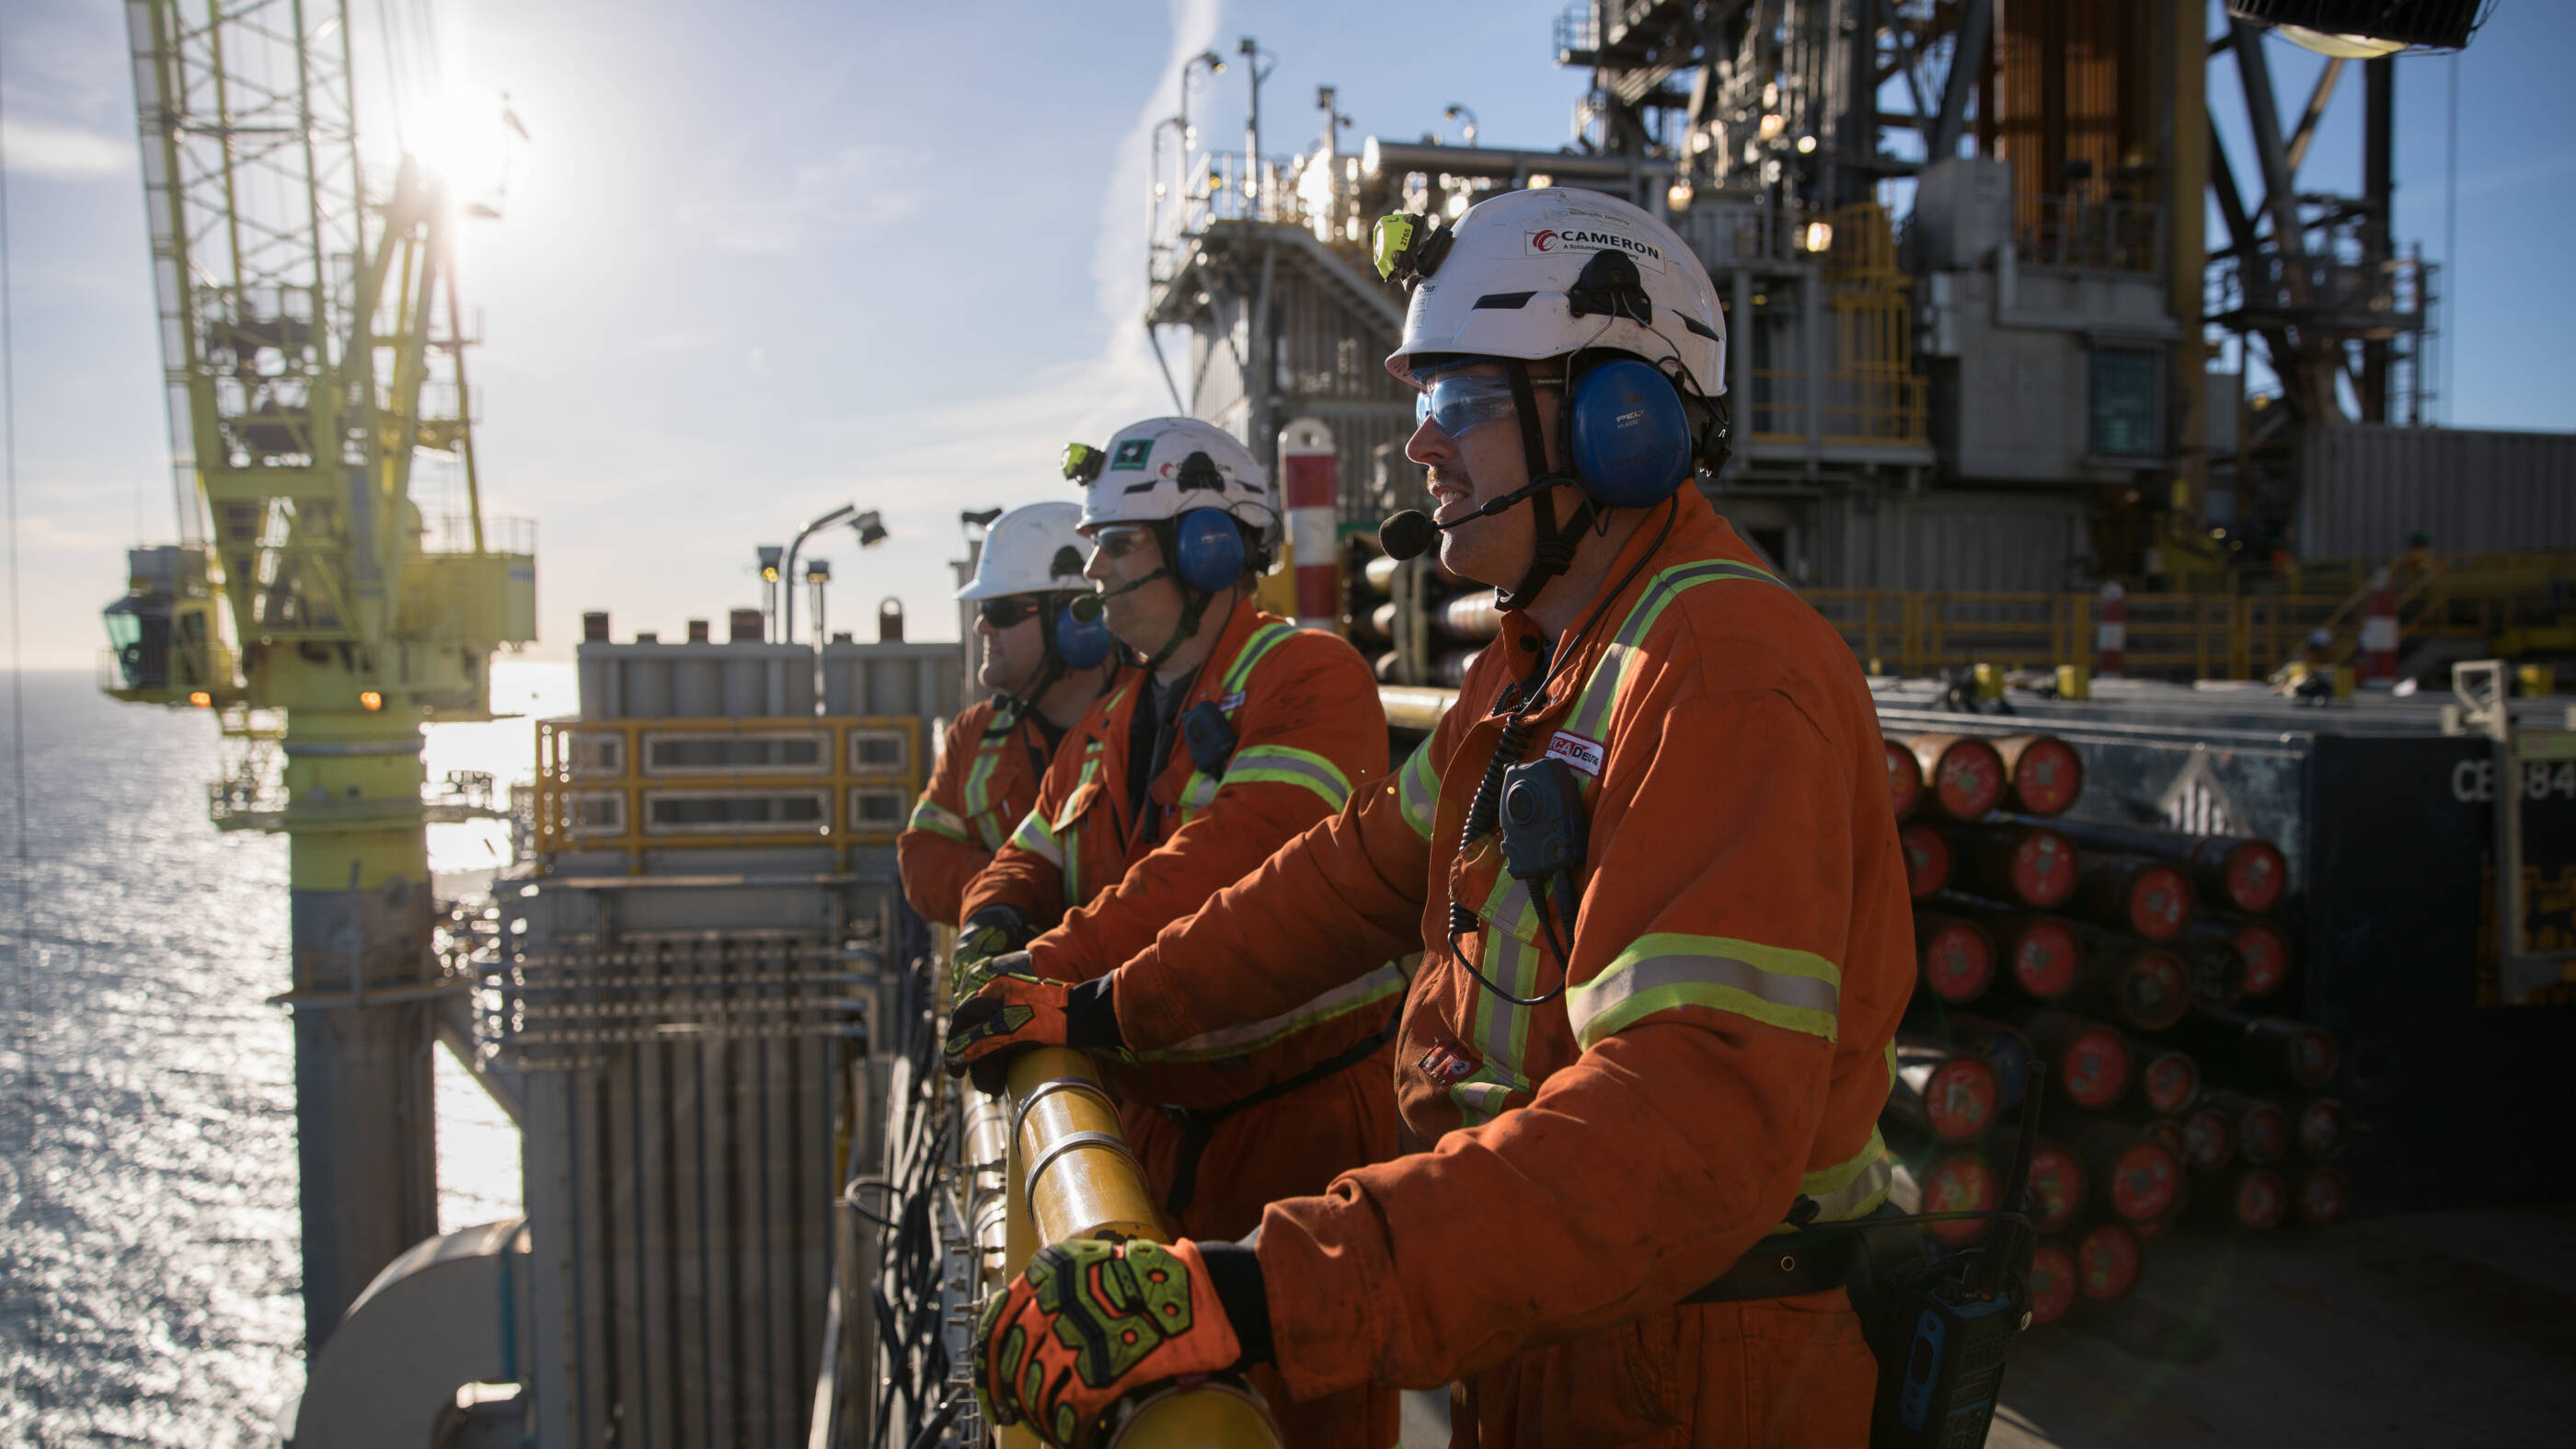 Go inside one of the worlds largest oil platforms